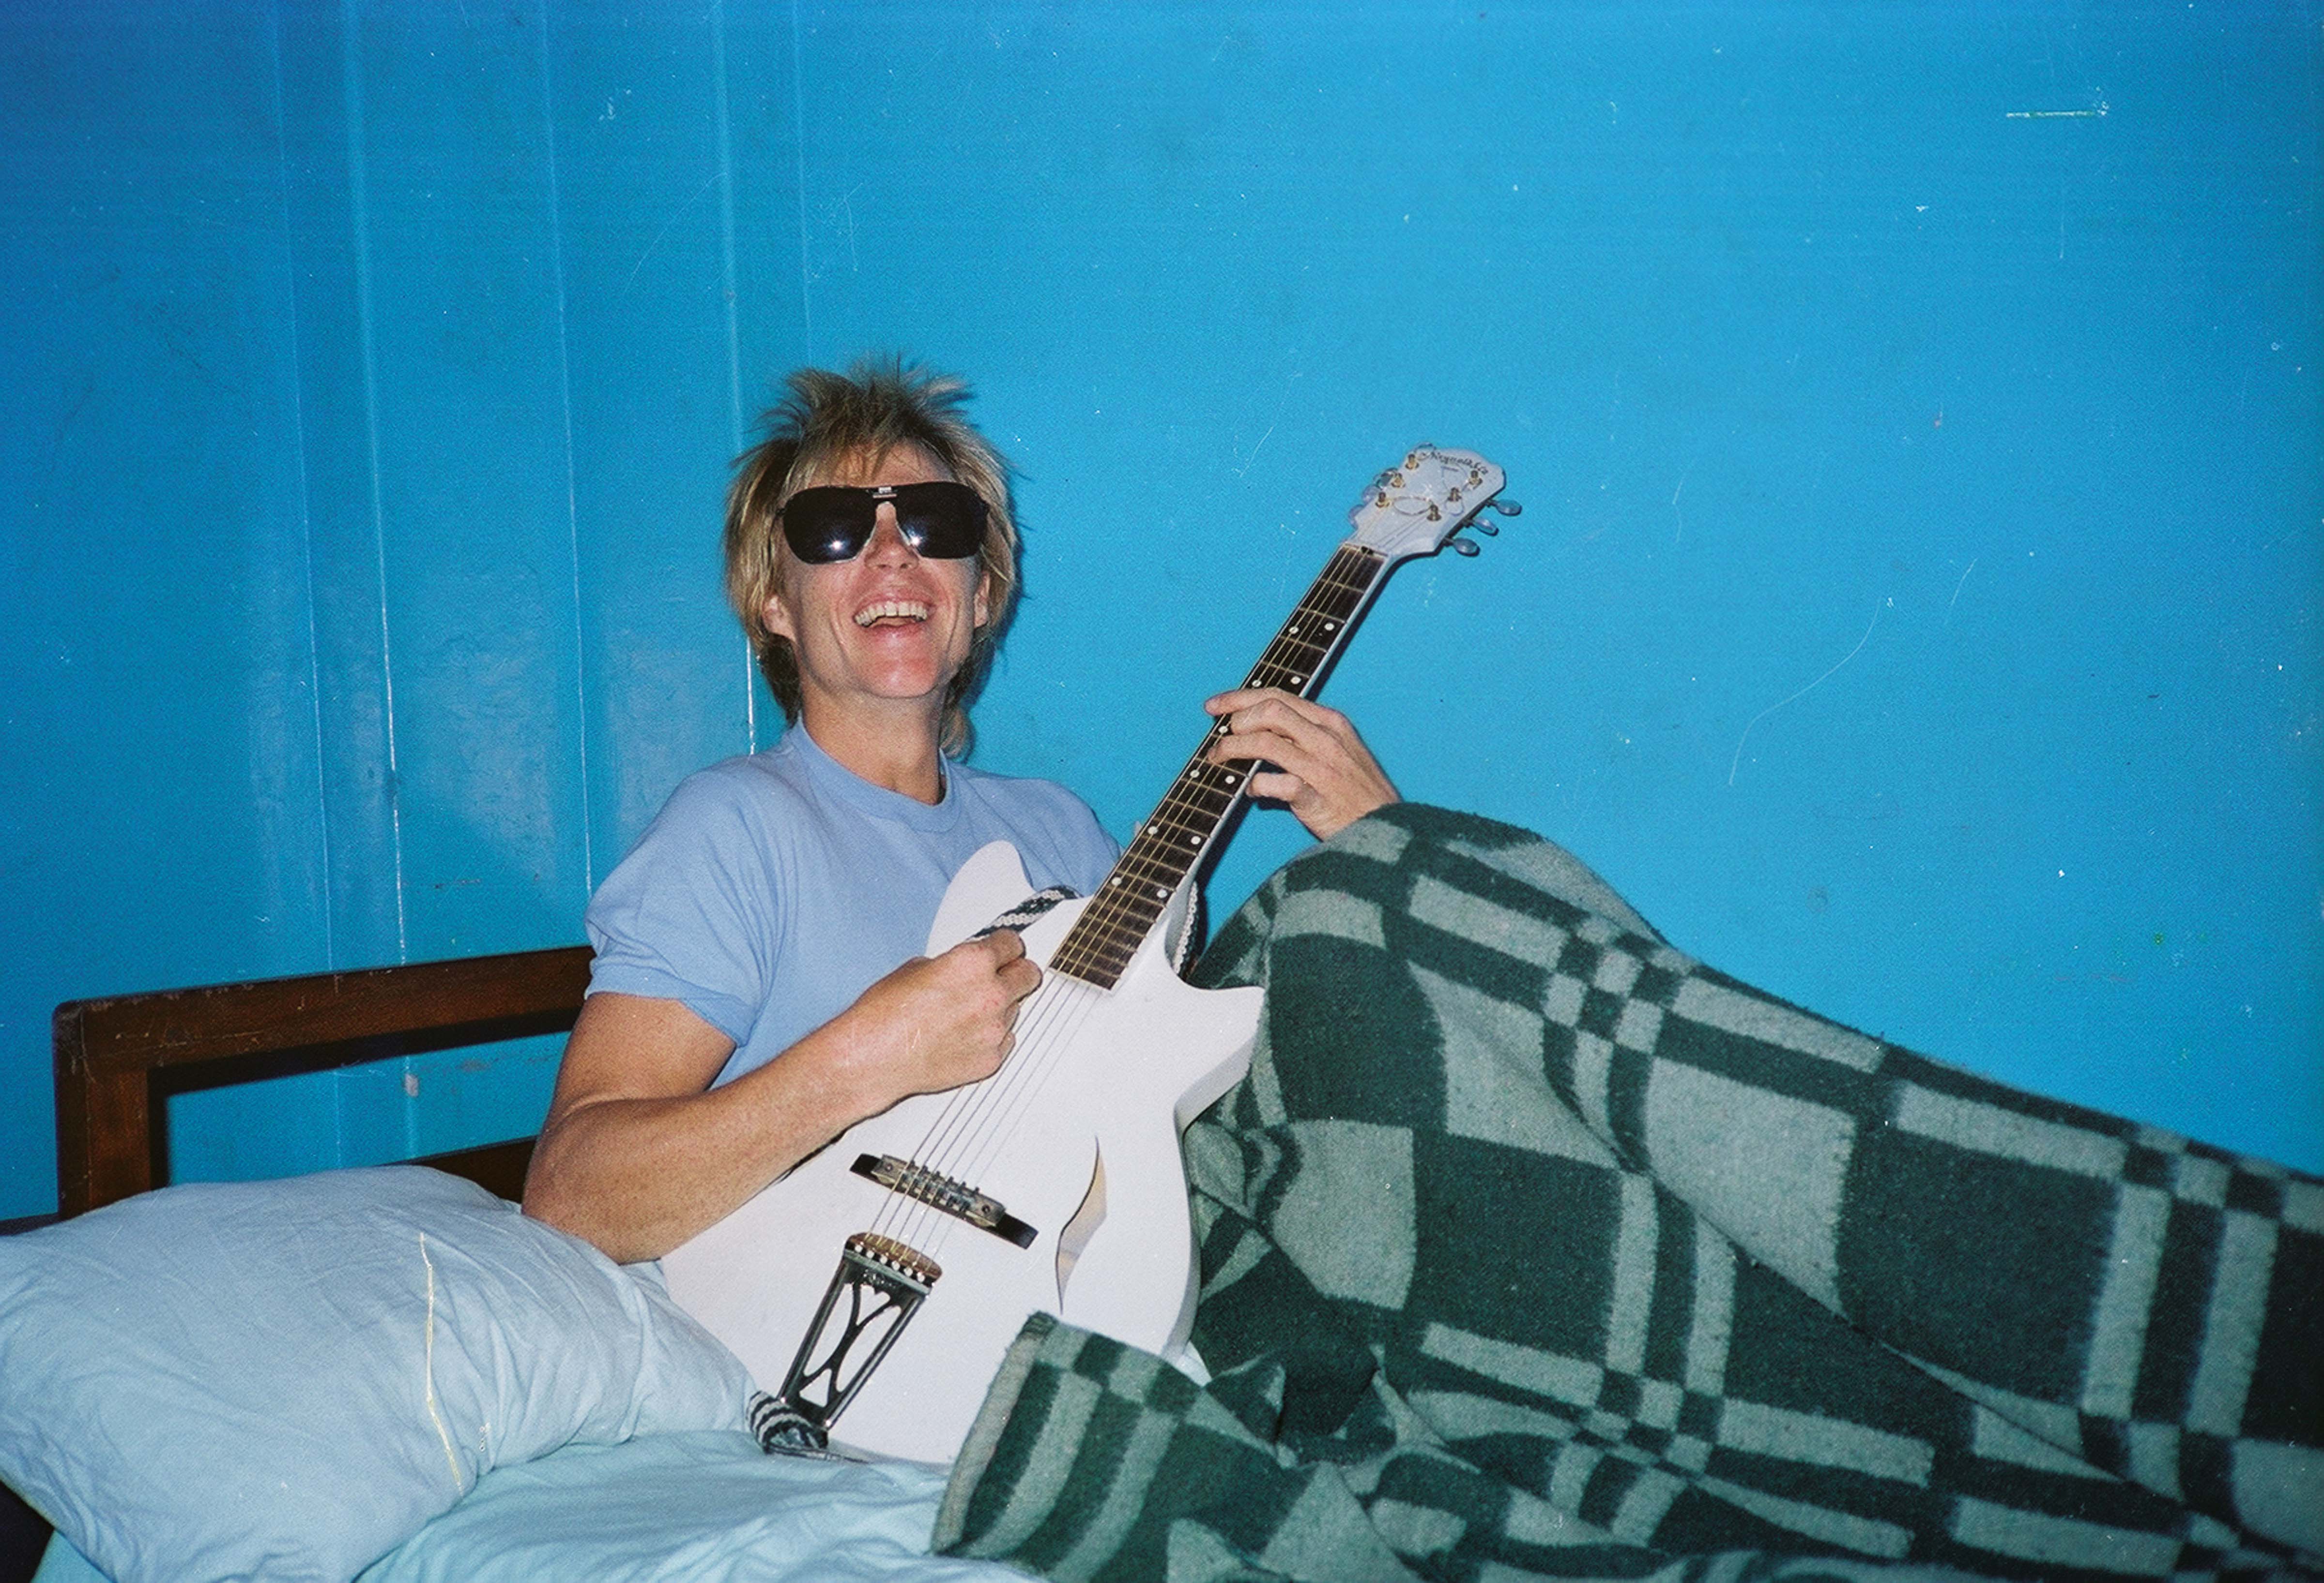 Jeff Shea On Bed With Guitar At Nyandarua Hotel